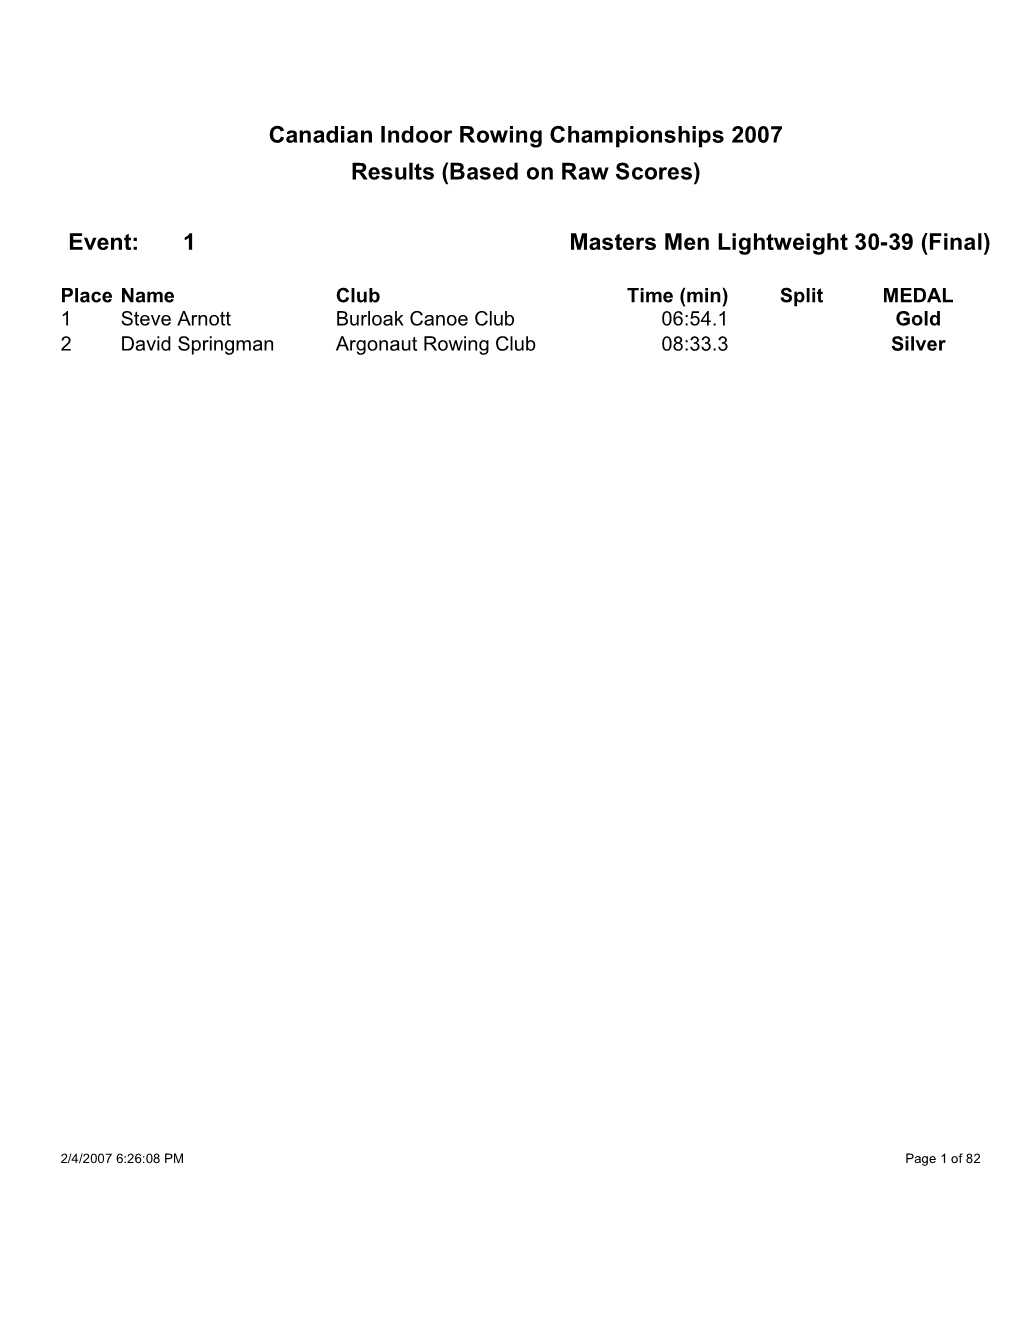 Canadian Indoor Rowing Championships 2007 Results (Based on Raw Scores)